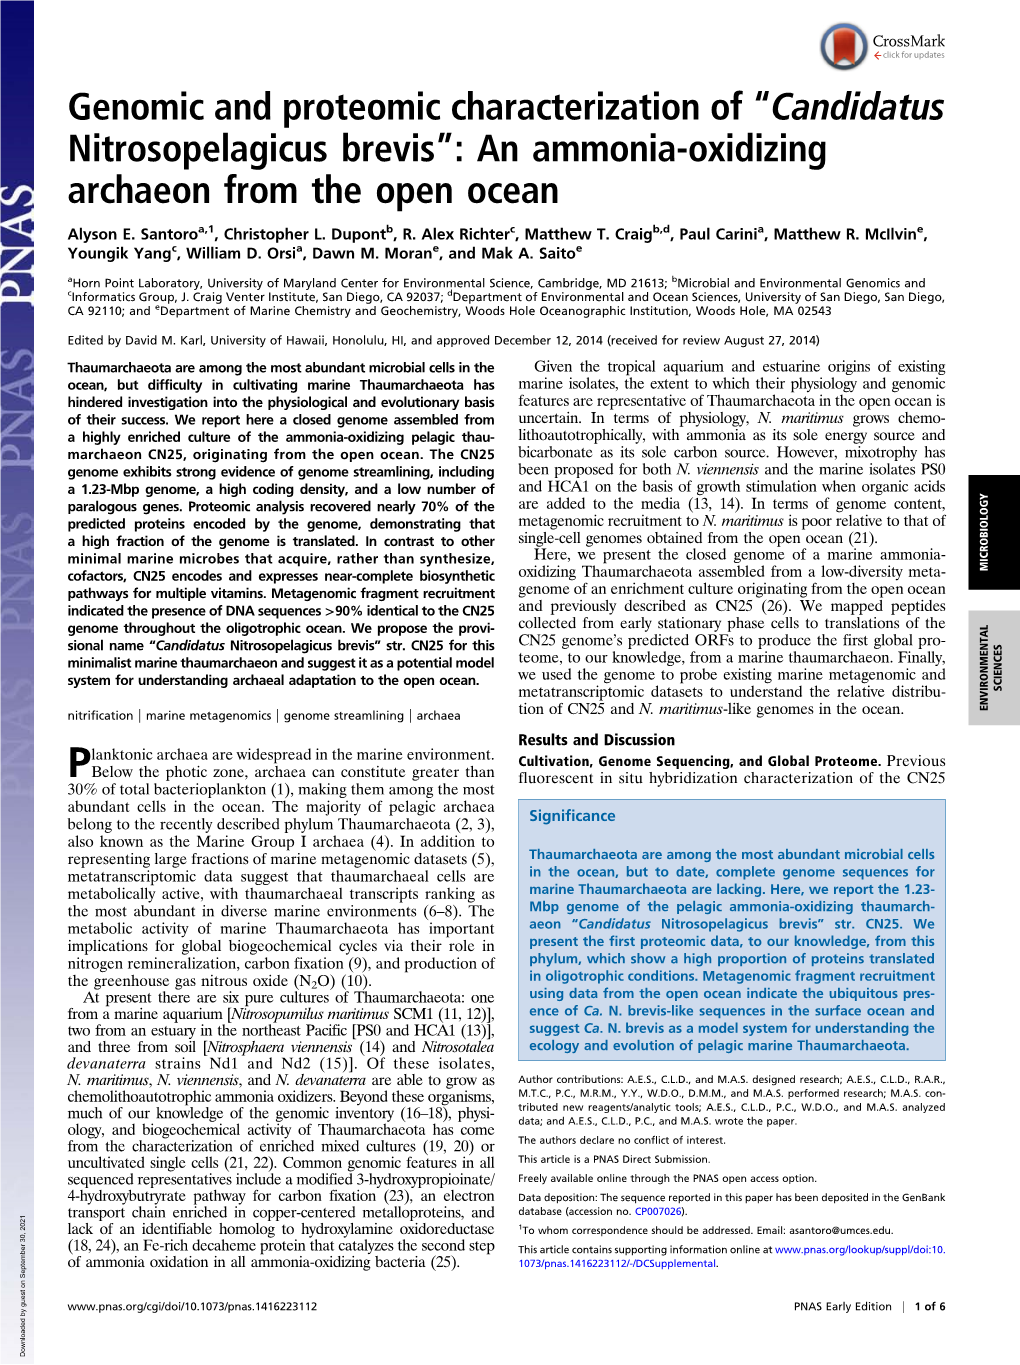 An Ammonia-Oxidizing Archaeon from the Open Ocean